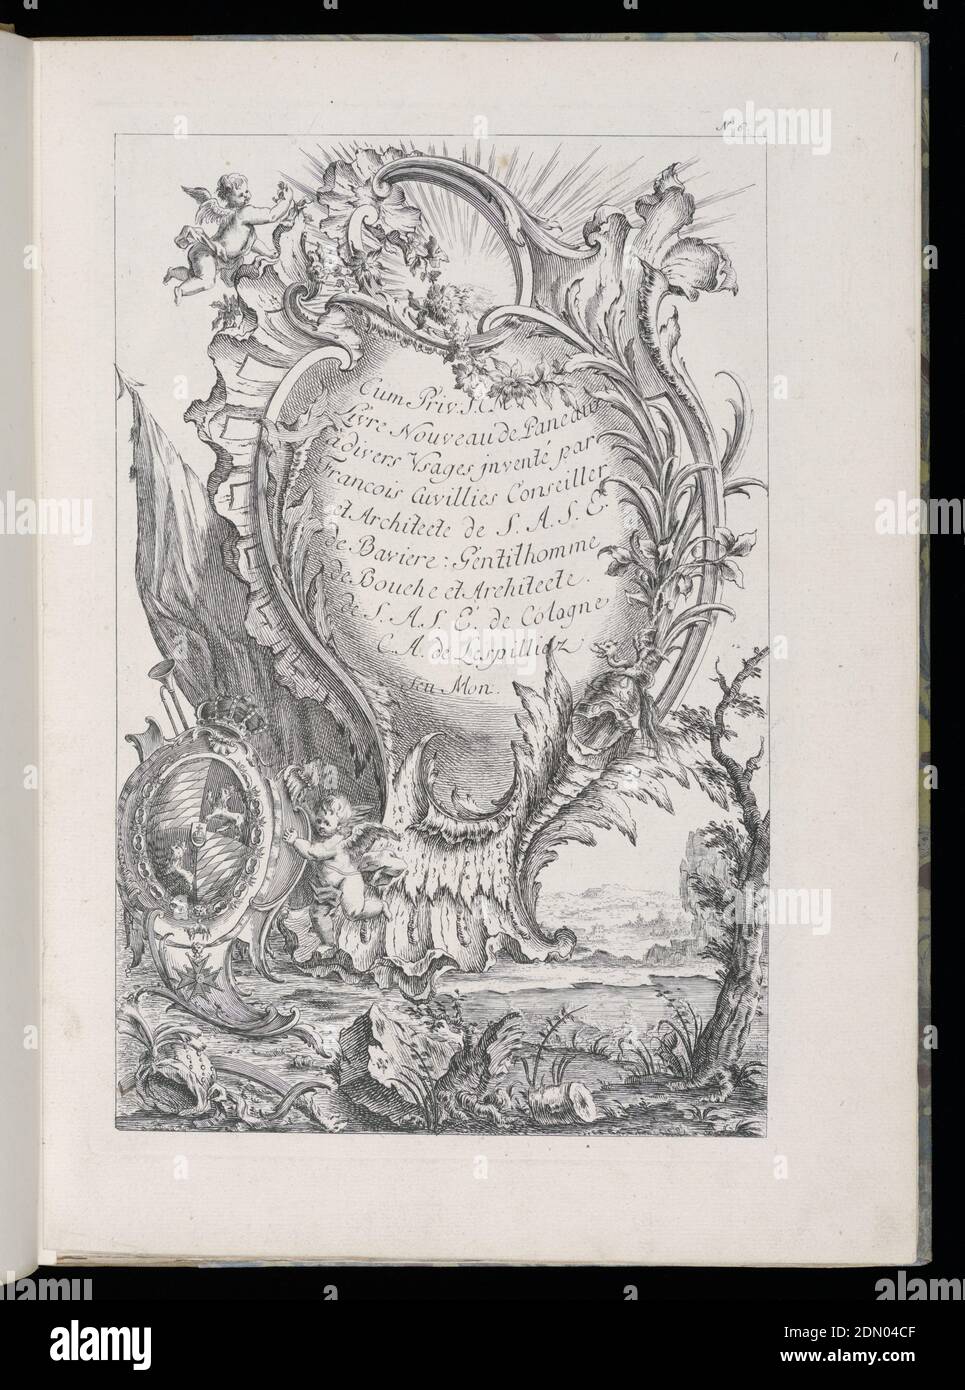 Title Plate, Livre Nouveaux de Paneaux à divers usages (Book of New Panels for Various Uses), François de Cuvilliés the Elder, Belgian, active Germany, 1695 - 1768, Carl Albert von Lespilliez, German, 1723 - 1796, François de Cuvilliés the Elder, Belgian, active Germany, 1695 - 1768, Engraving on off-white laid paper, Folio 2, title, plate 1 of series of 6. Second page of frontispiece of book. Within rectangular framing lines, a cartouche in Rococo style with winged putti at top and bottom, the putto figure at lower left supporting a crowned coat of arms. Printed text within cartouche., Munich Stock Photo